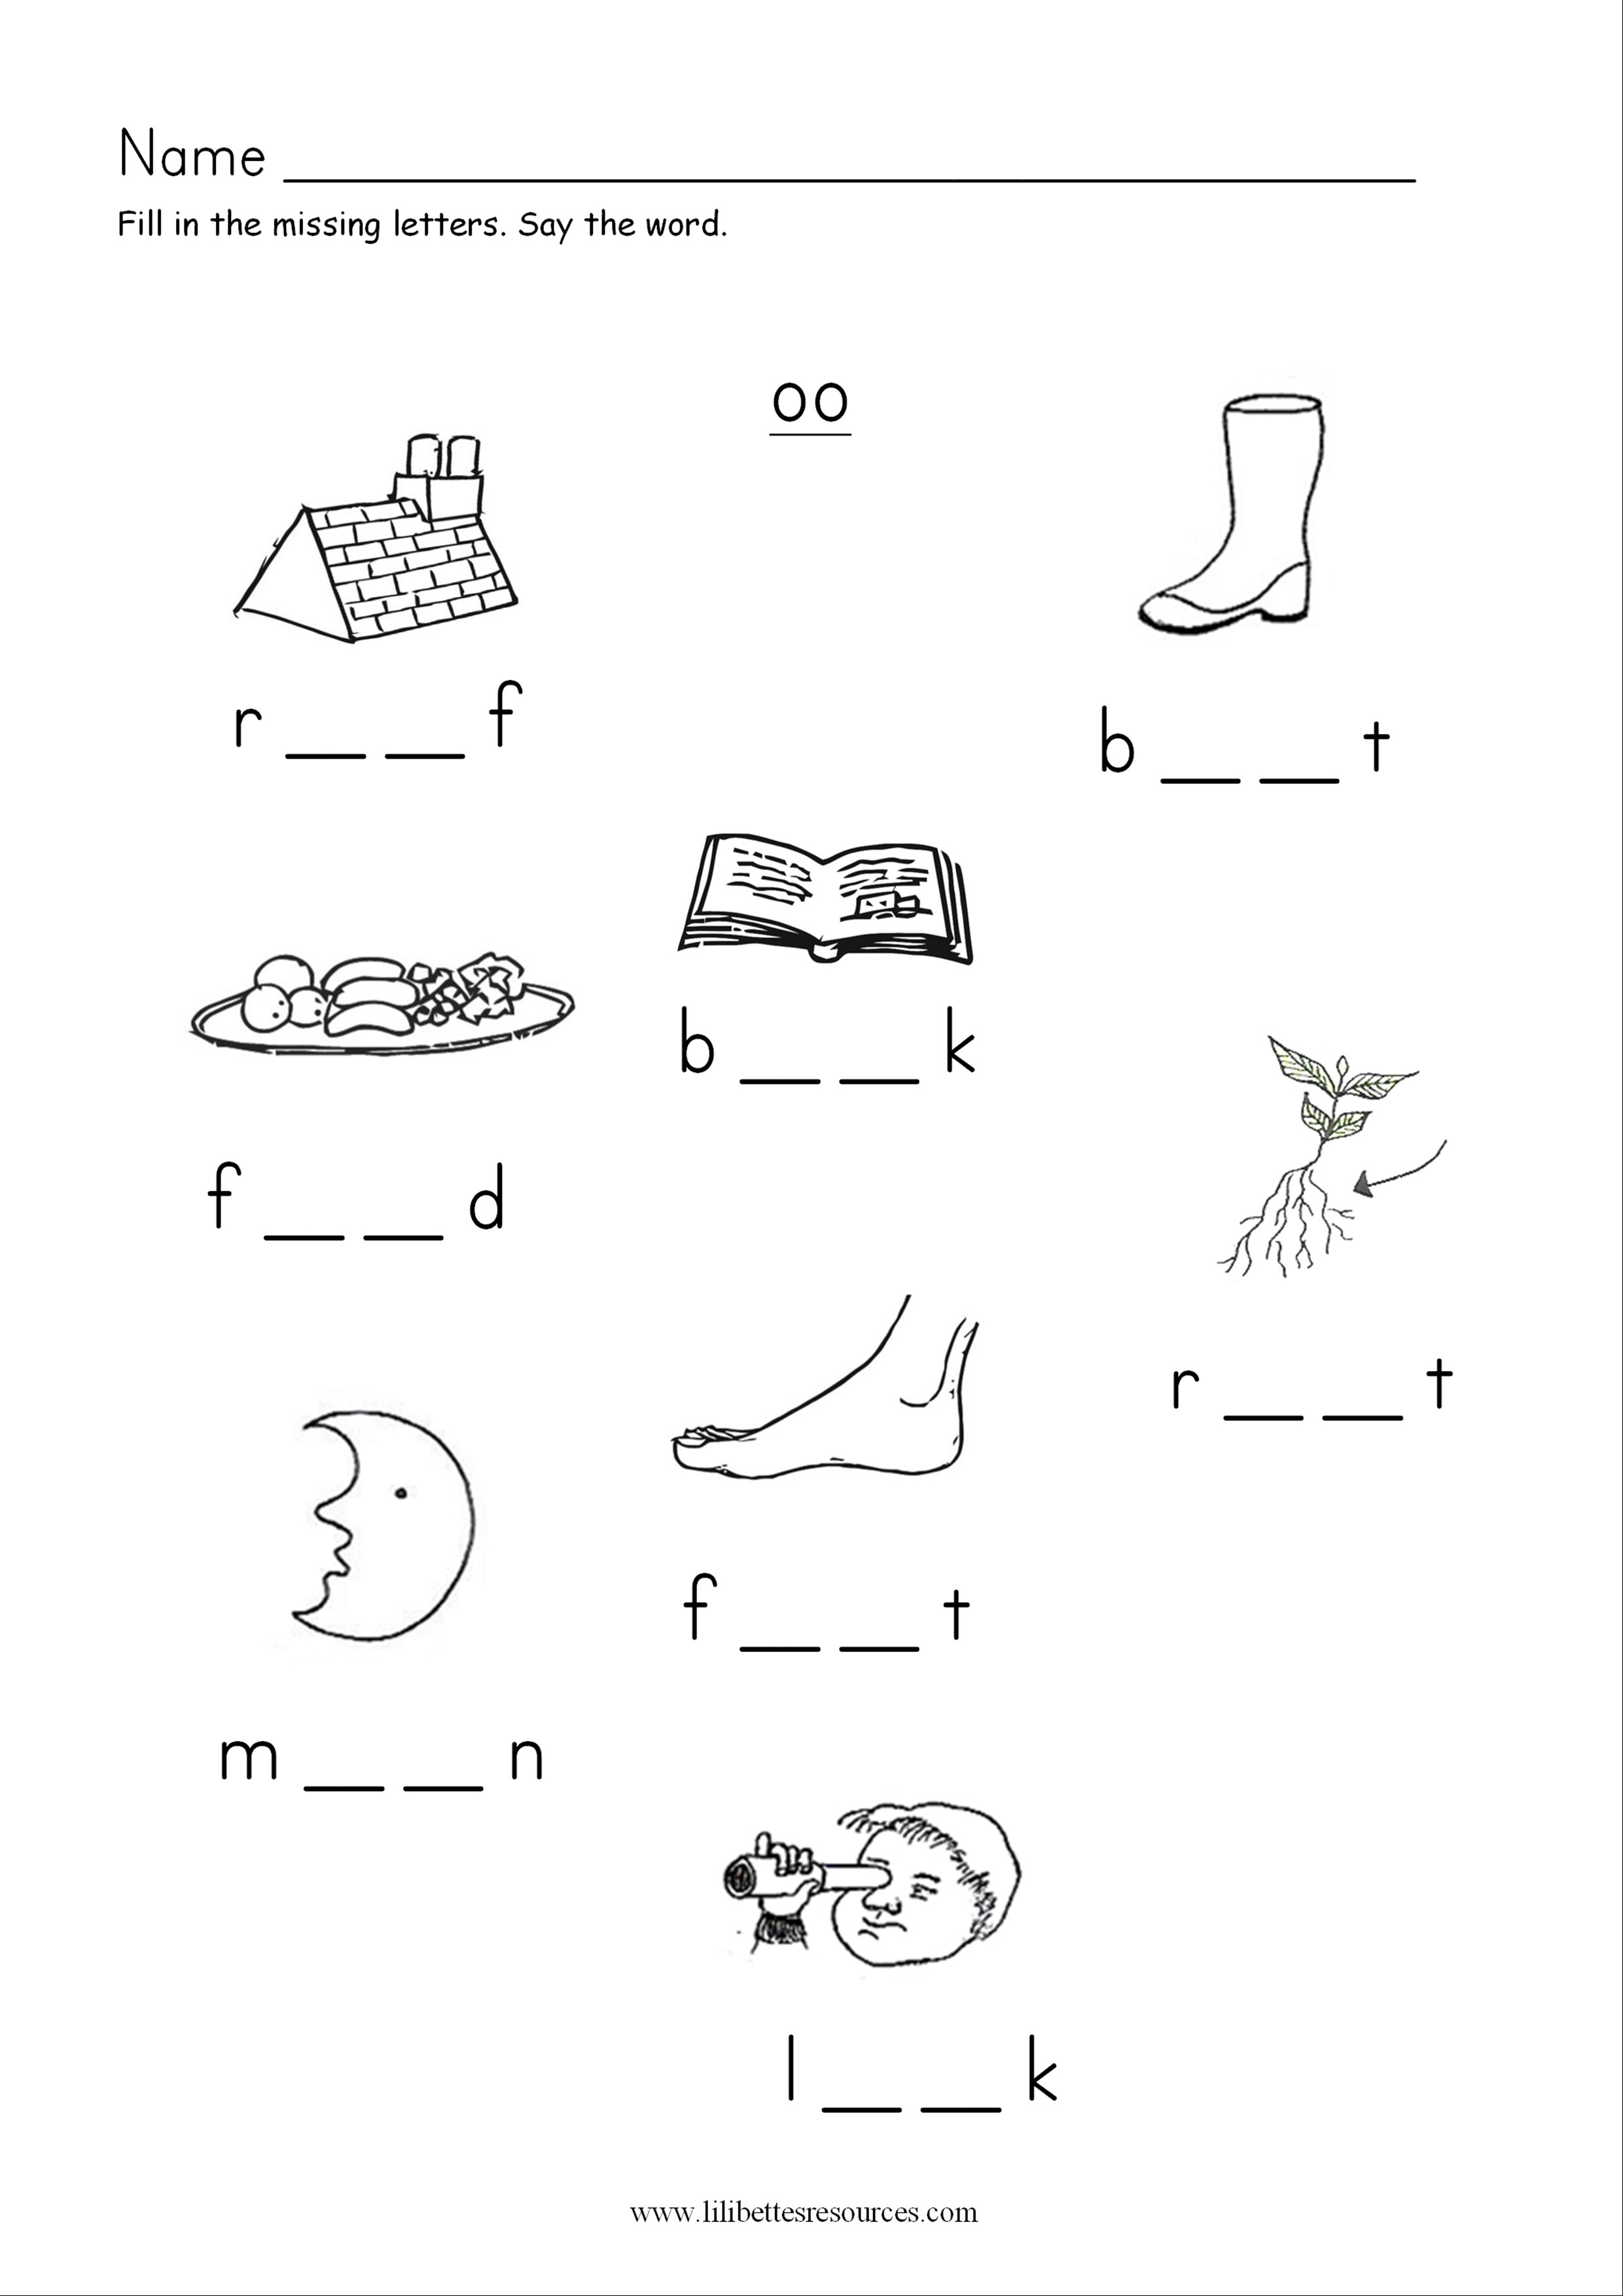 worksheets-for-oo-words-the-measured-mom